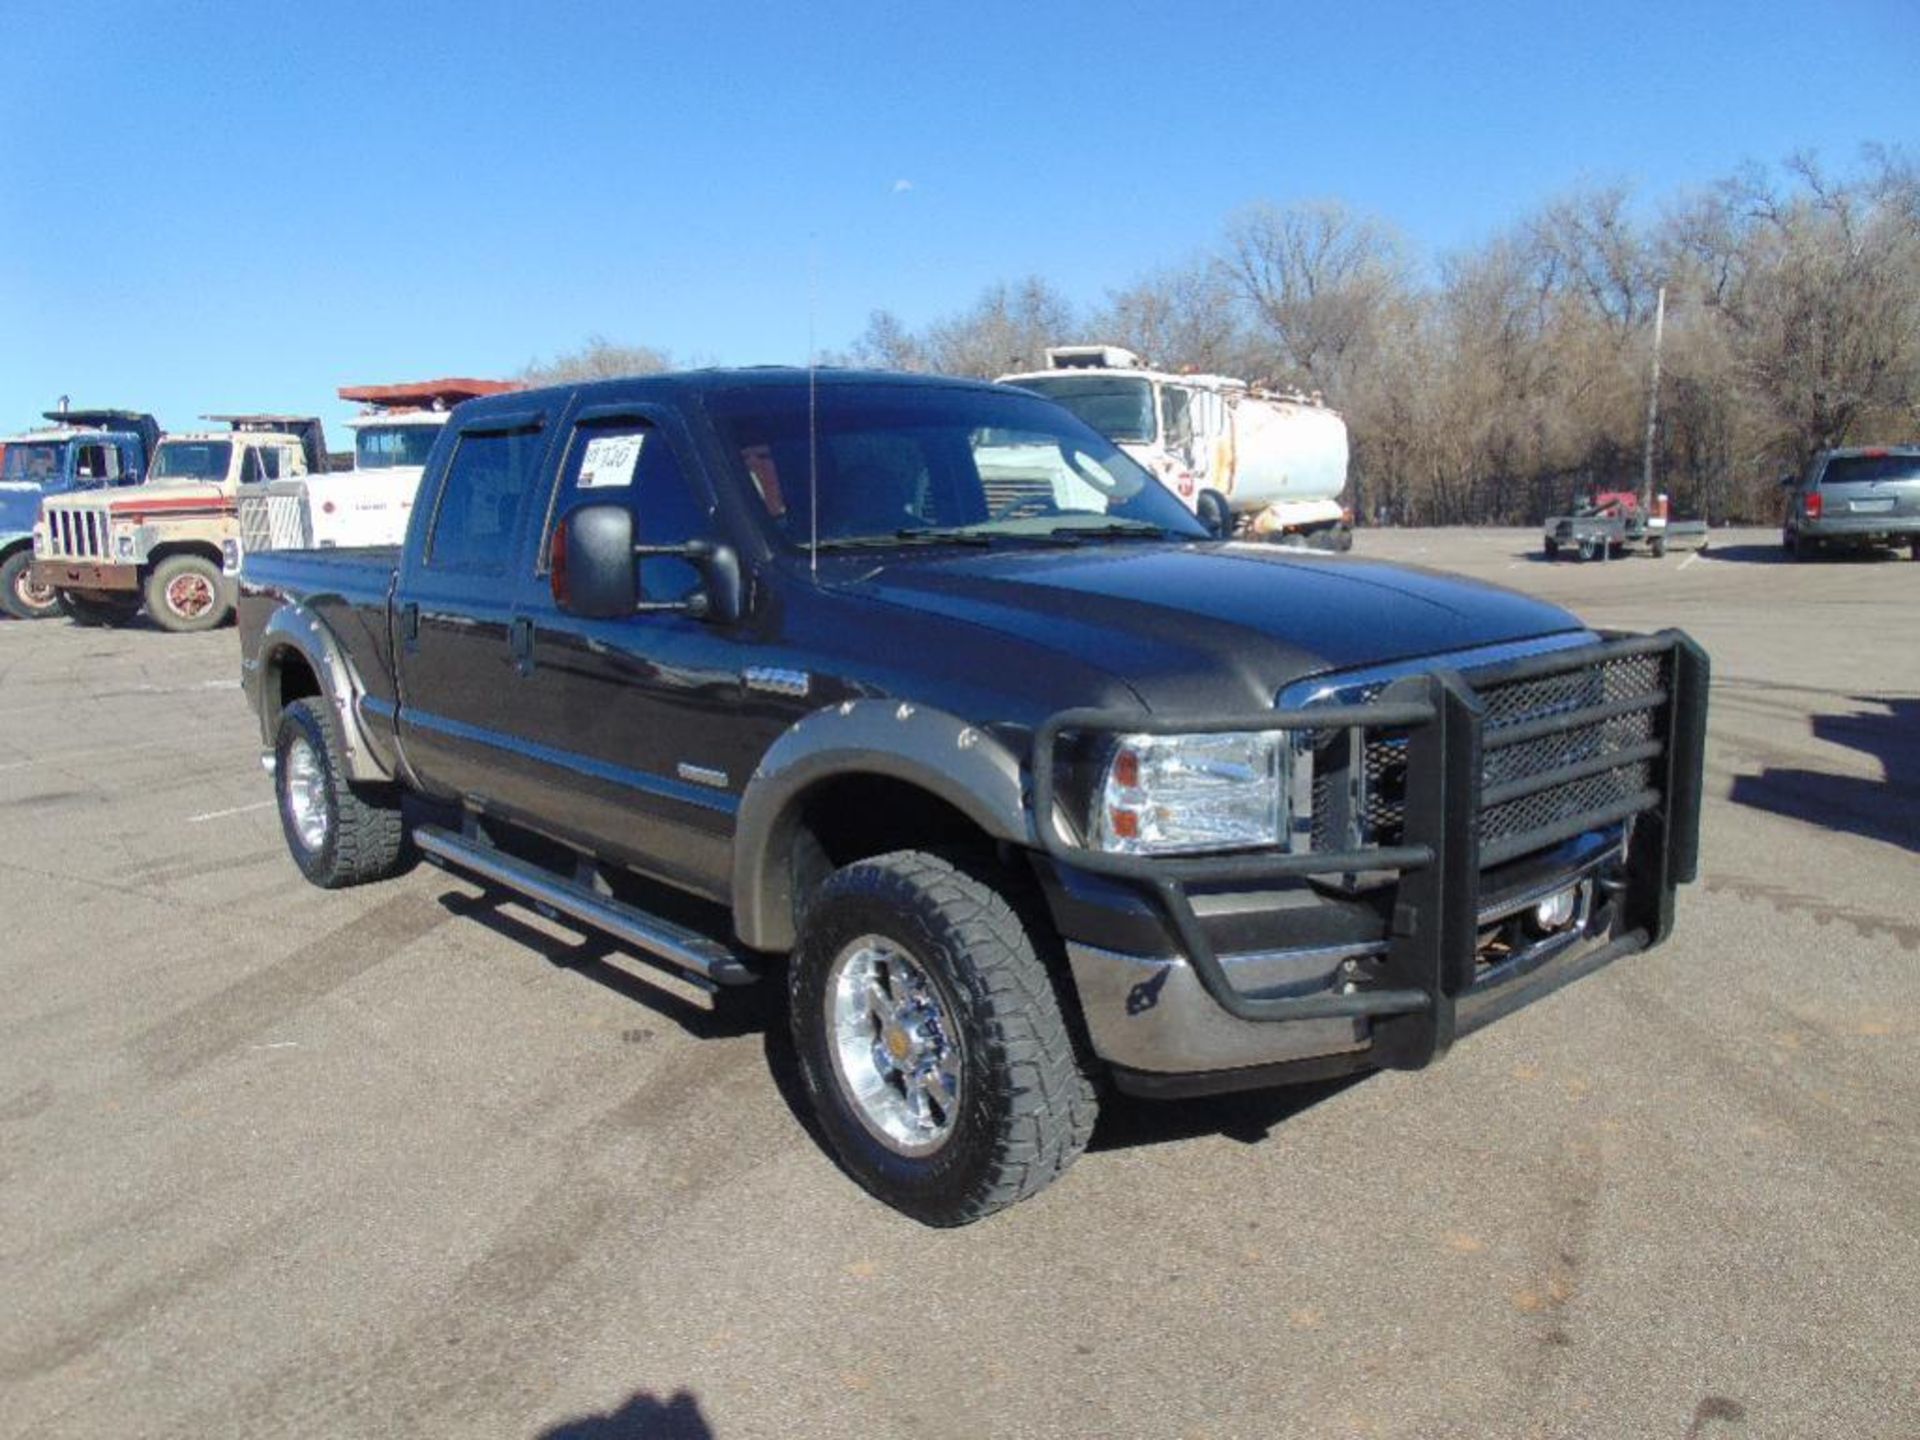 2005 Ford F250 4x4 Pickup s/n 1ftsw21p15ec00636, pwr stroke eng,auto, Lariat,